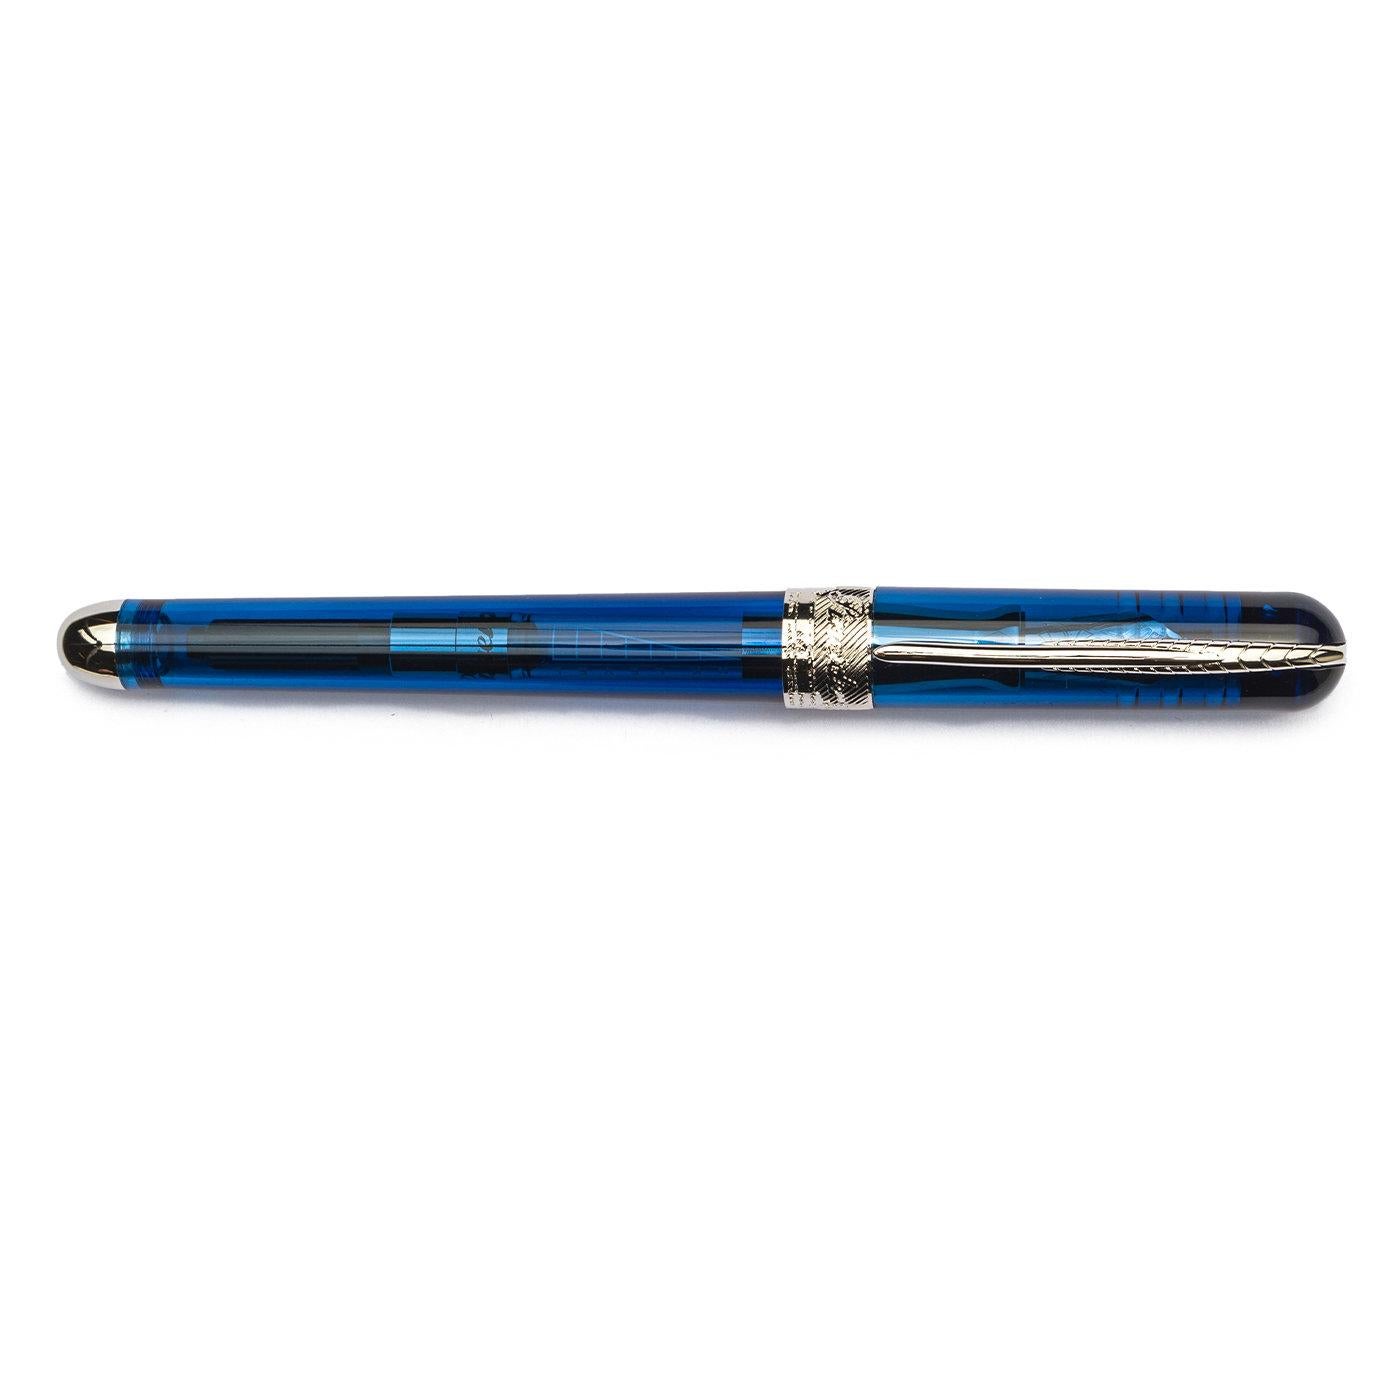 This remarkable fountain pen features a stunning demi-transparent design with an ink level gauge printed on the side of the converter to keep it monitored. It is crafted of break-resistant blue UltraResin developed by Pineider employing an